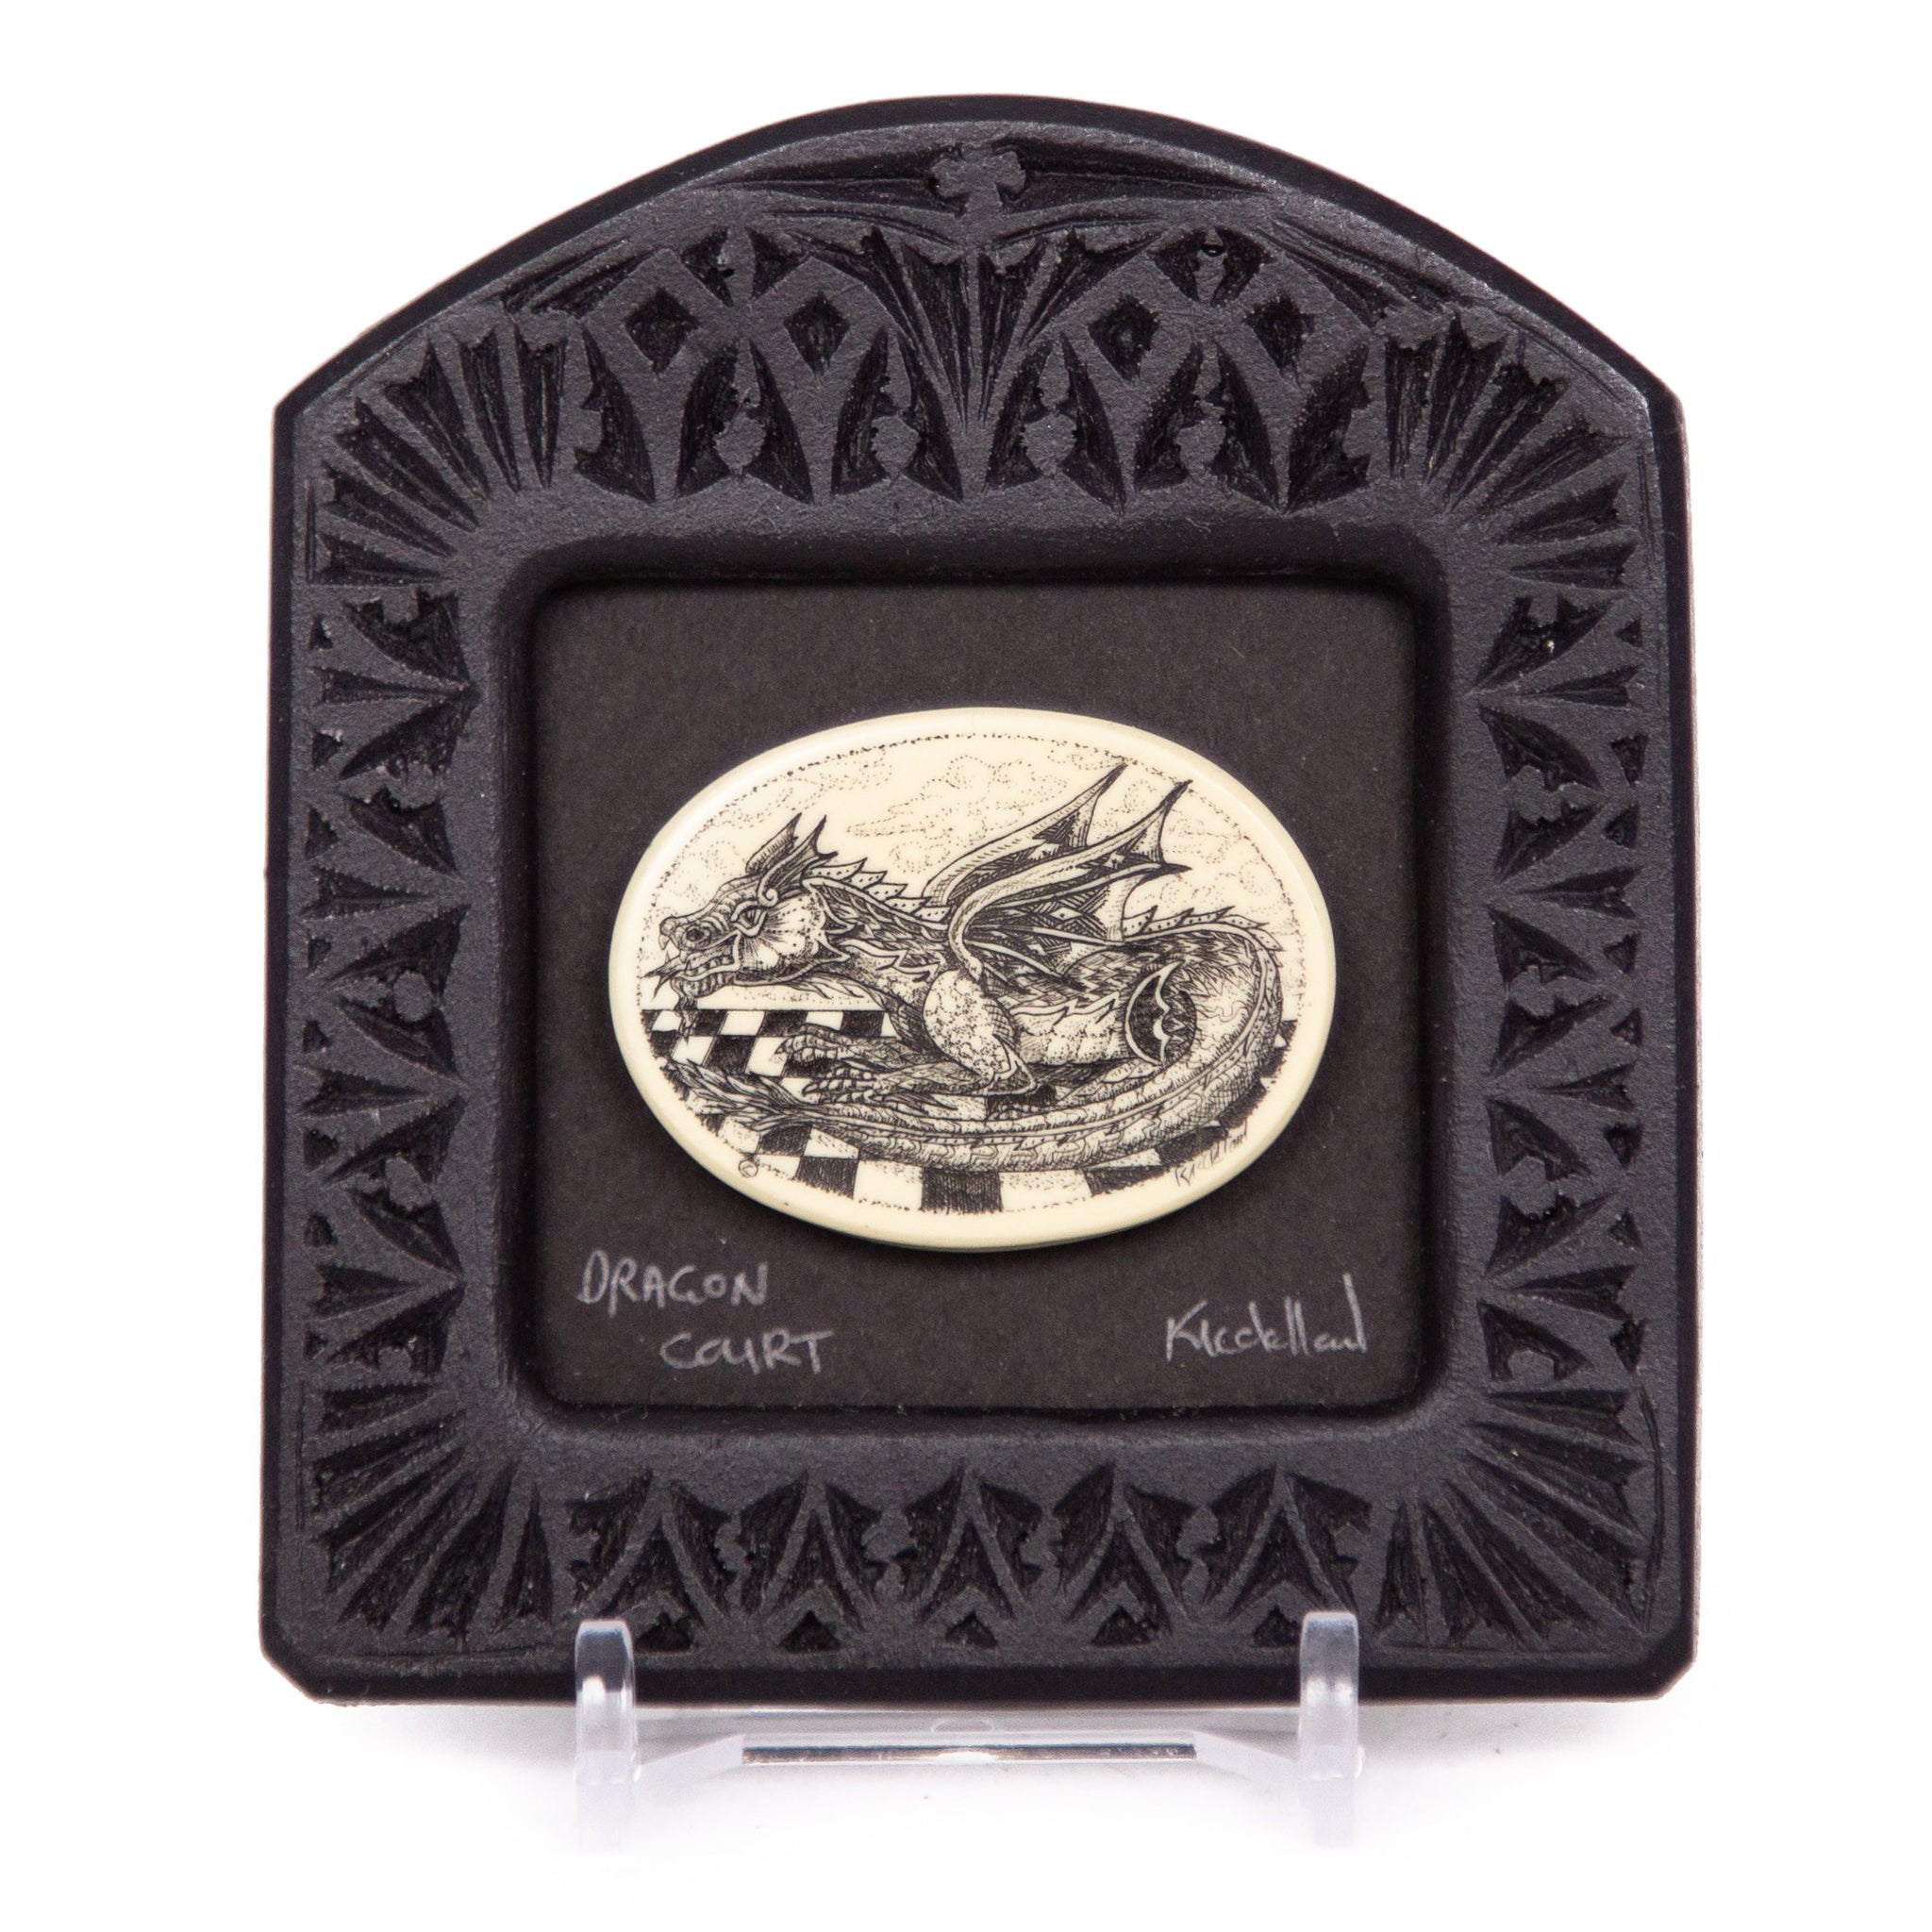 "Dragon Court" Small Chip Carved Frame